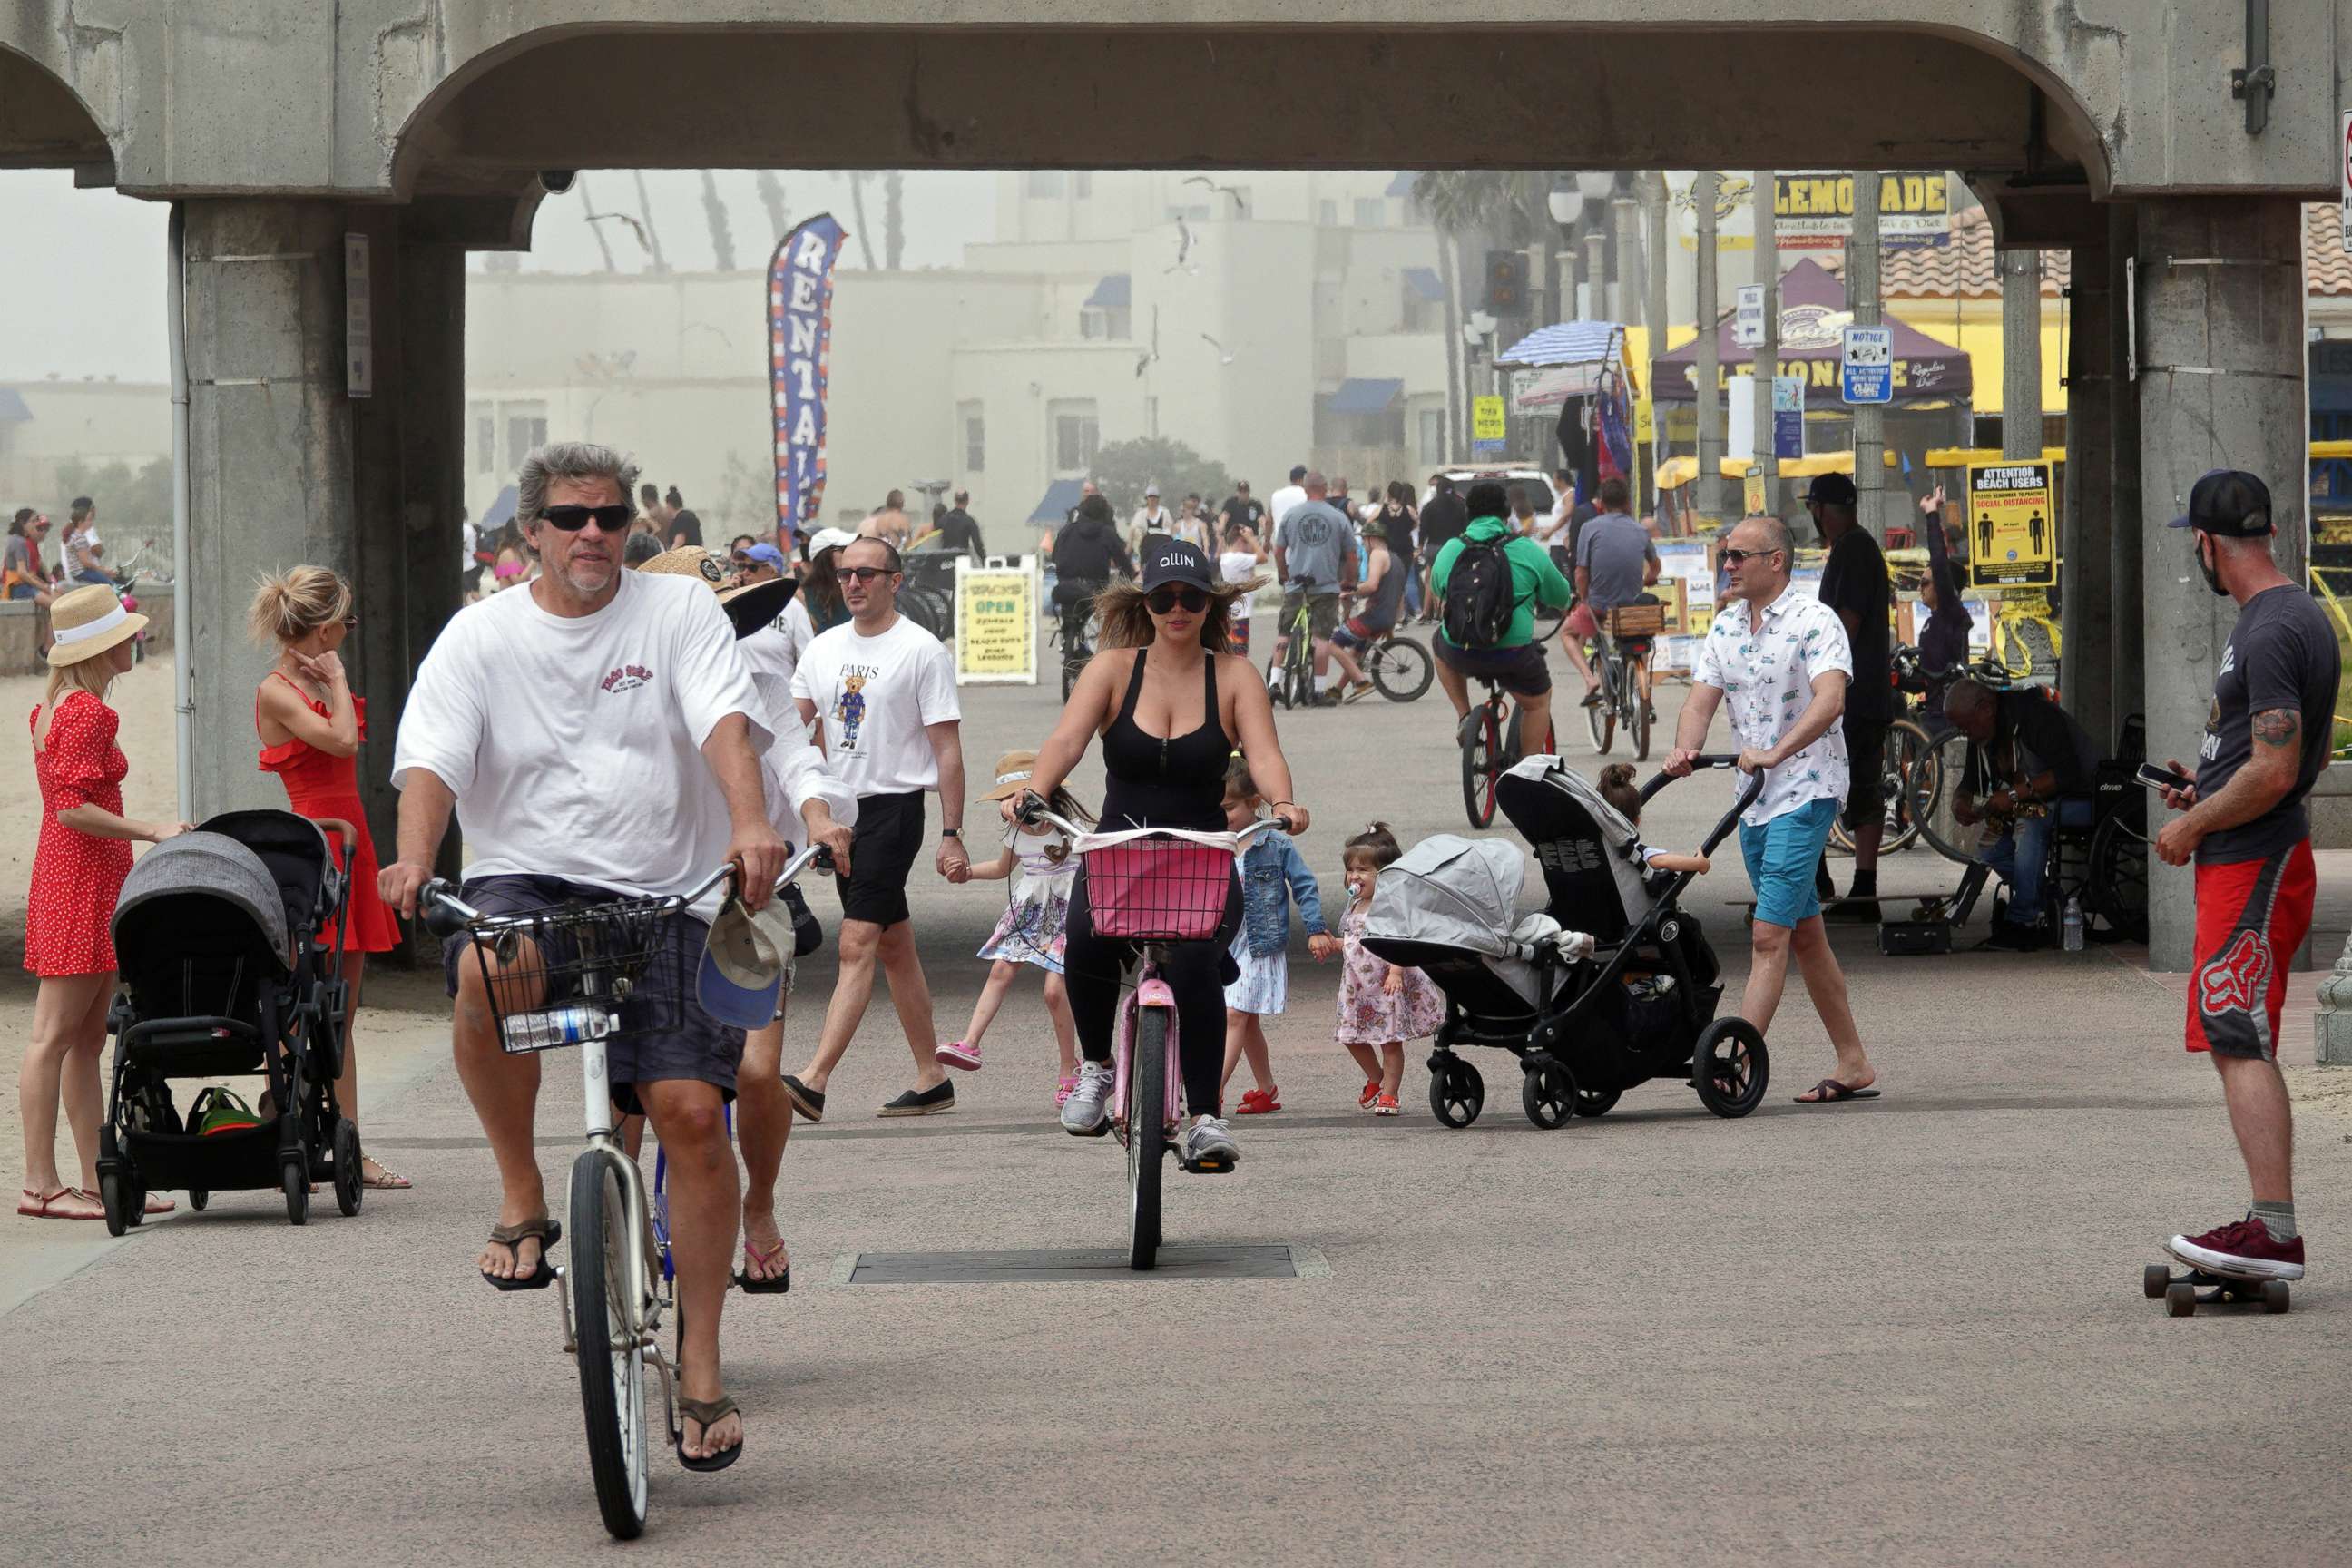 PHOTO: People ride bikes and walk on a path along the beach on April 26, 2020 in Huntington Beach, Calif.